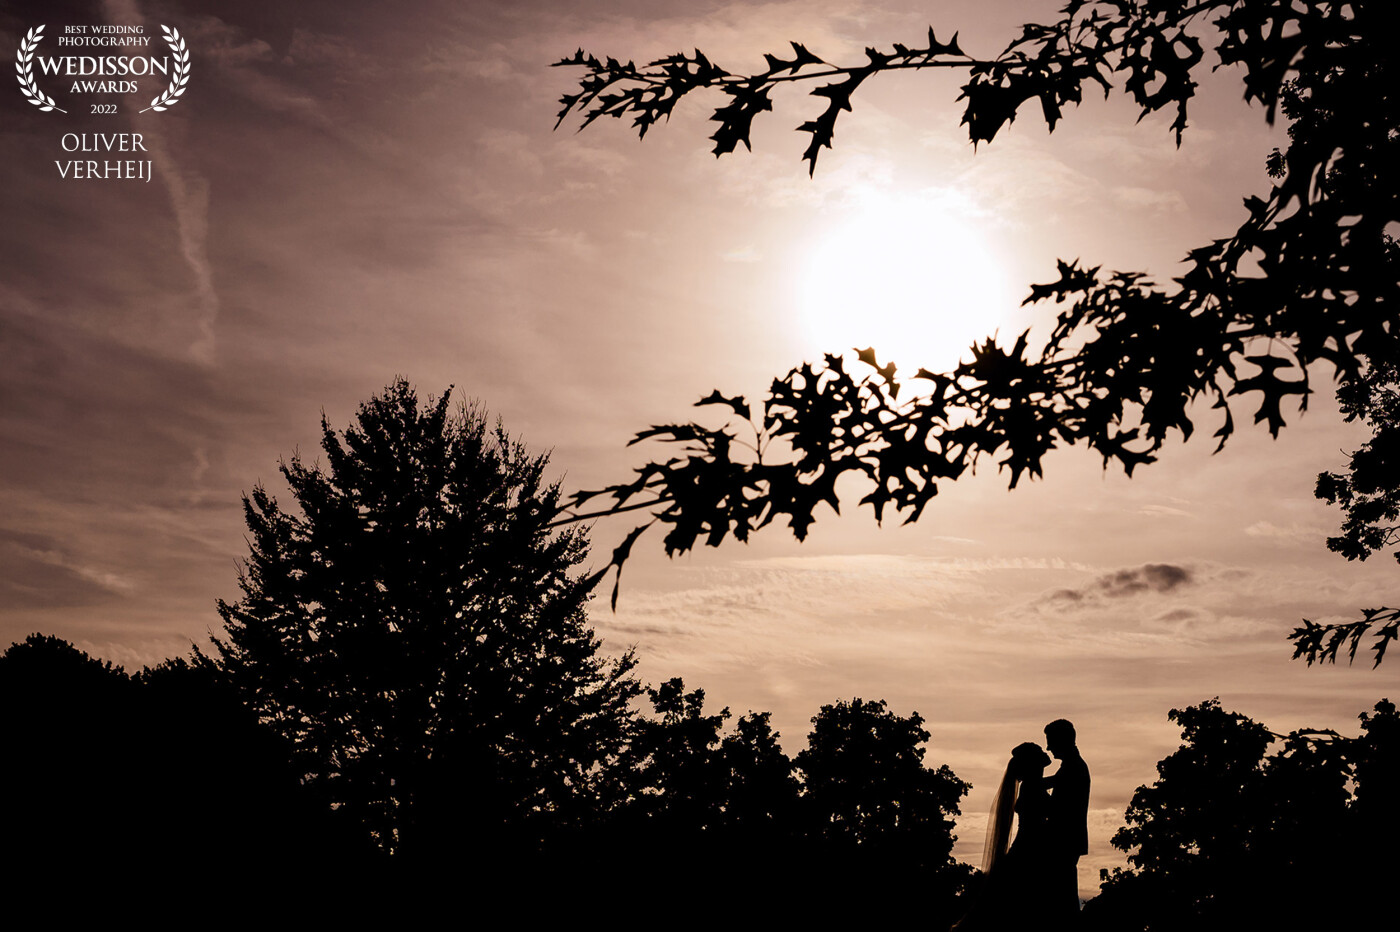 A silhouette is always a good idea. Not only because it's a wonderful picture, but also because the newly weds get to have a little time alone together on their weddingday.